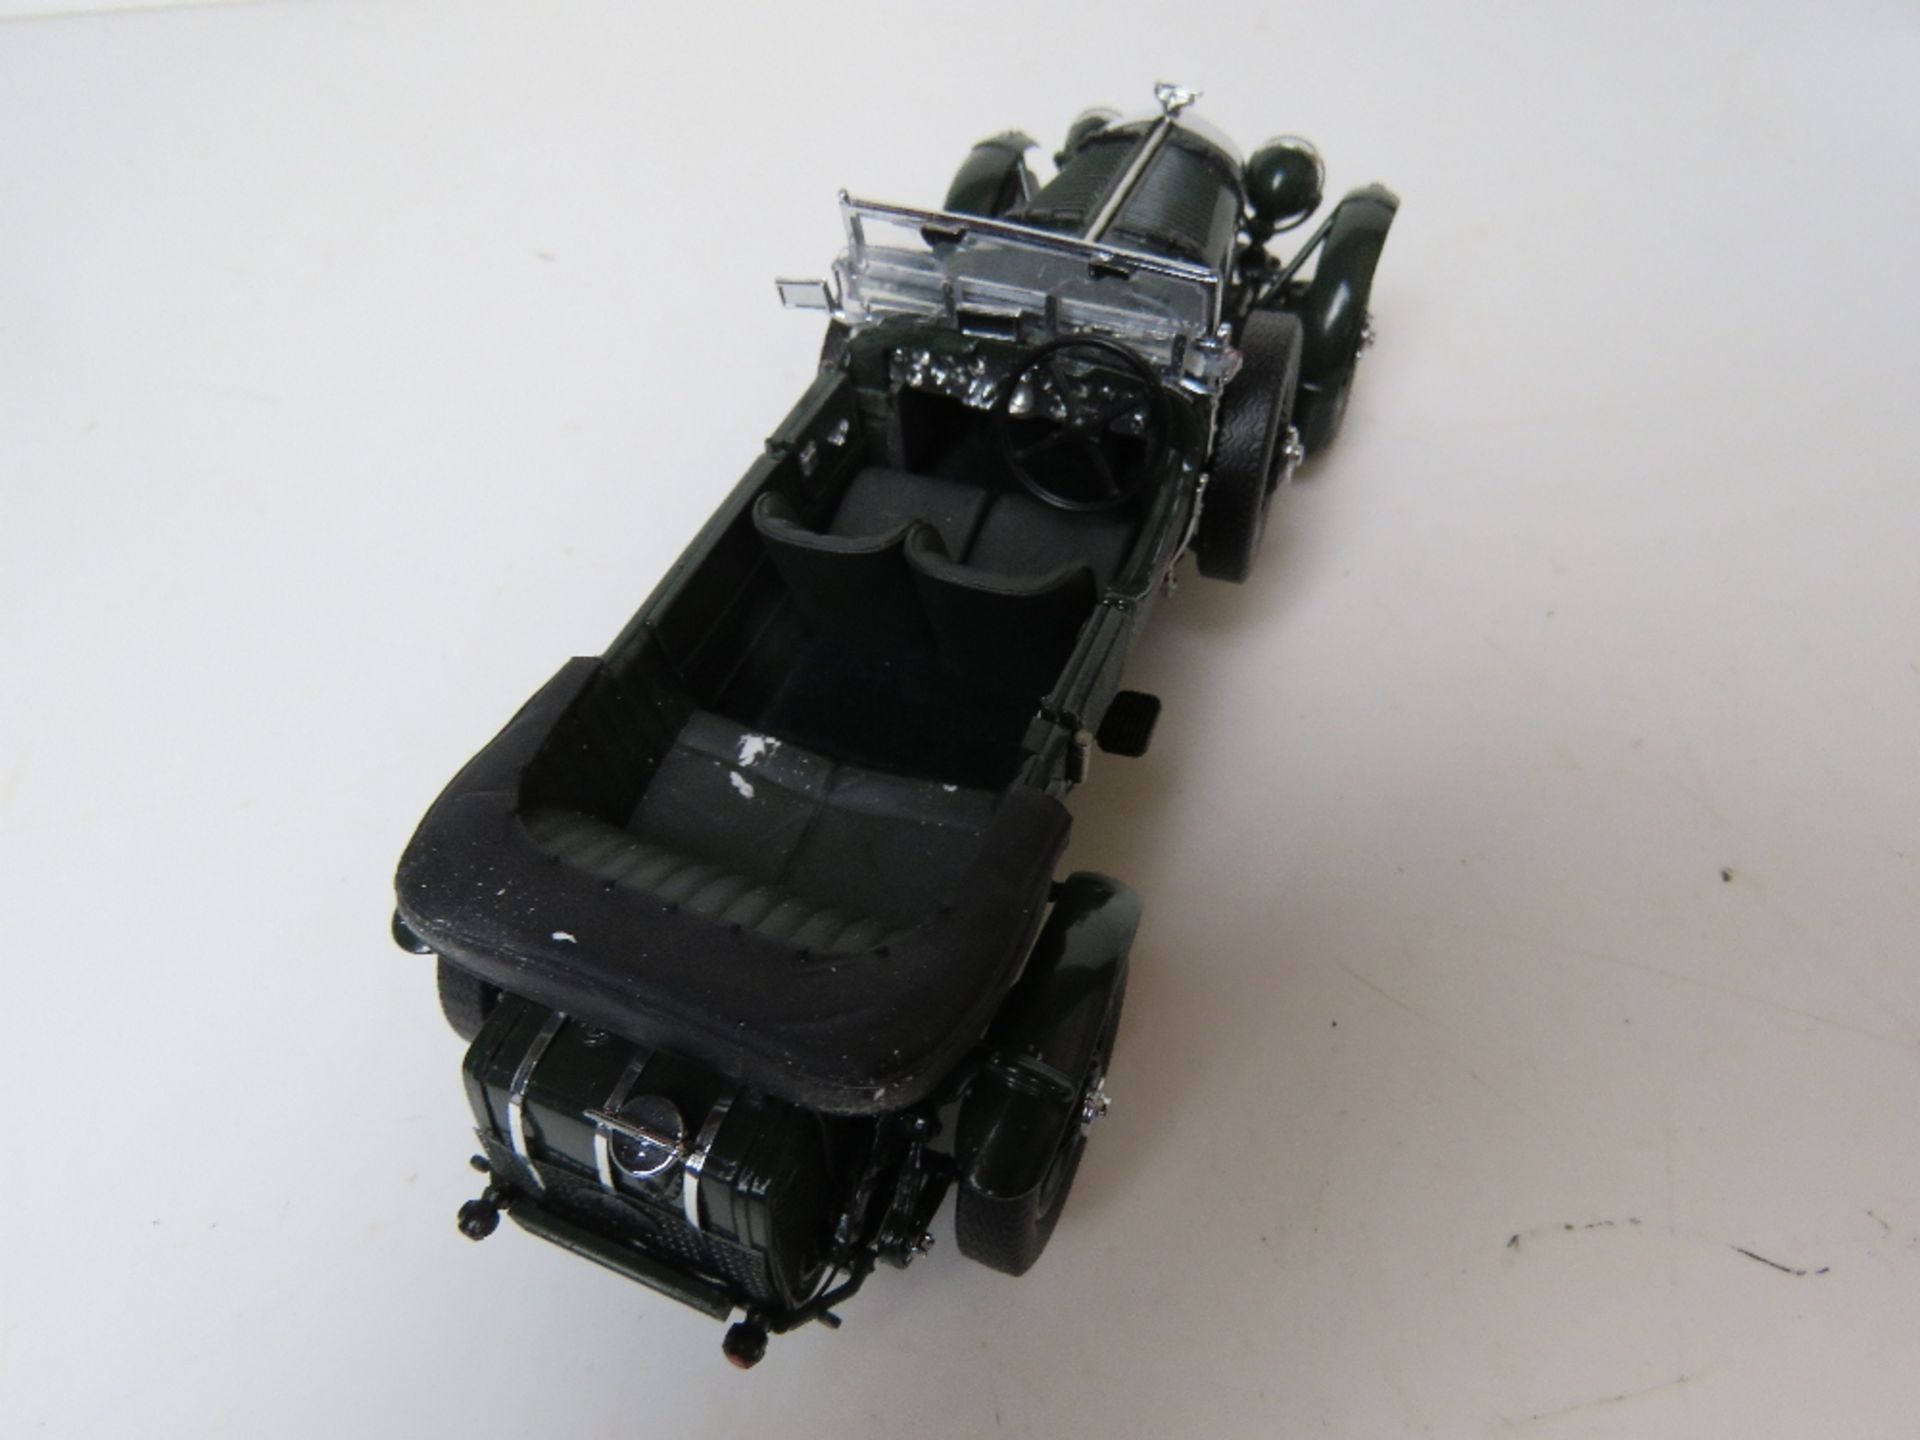 A 1:24 scale model 1929 Bentley 4.5Litre - Image 2 of 2